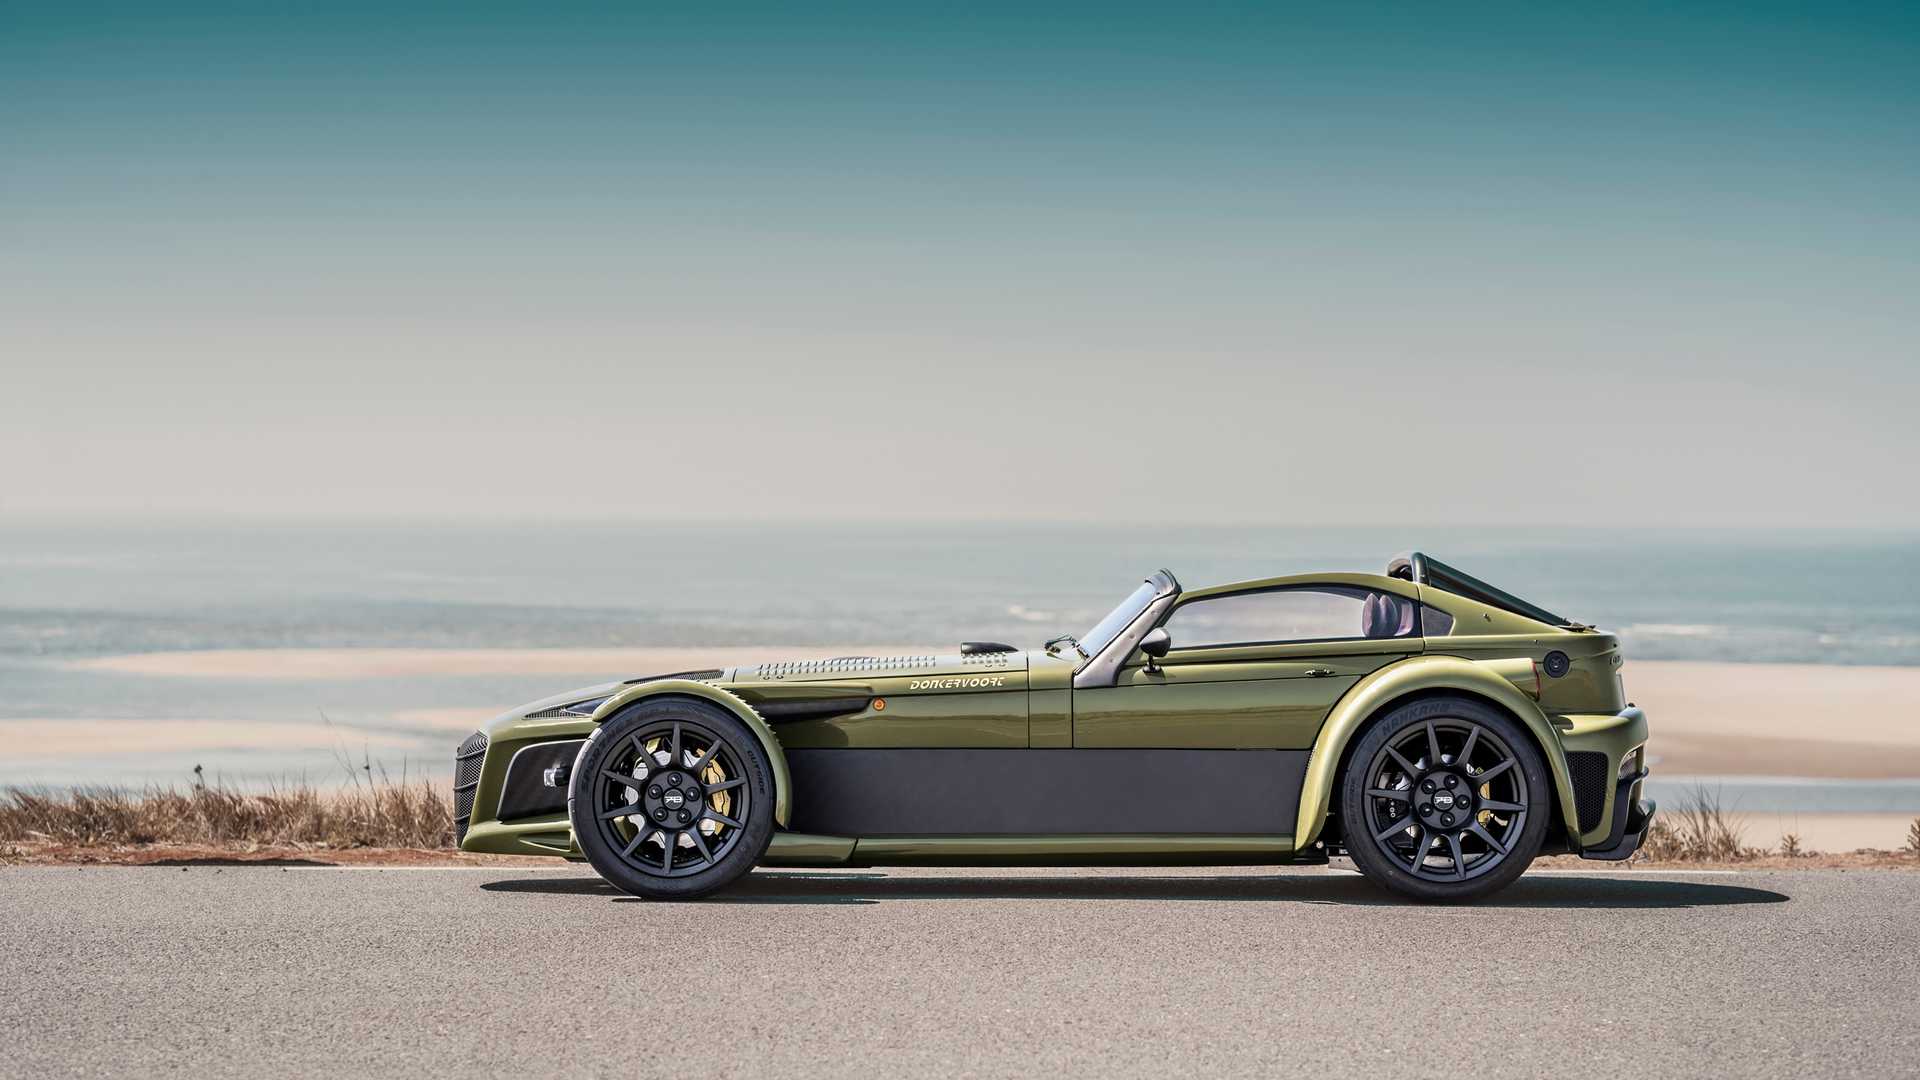 Donkervoort D8 Gto-Jd70 Wallpapers